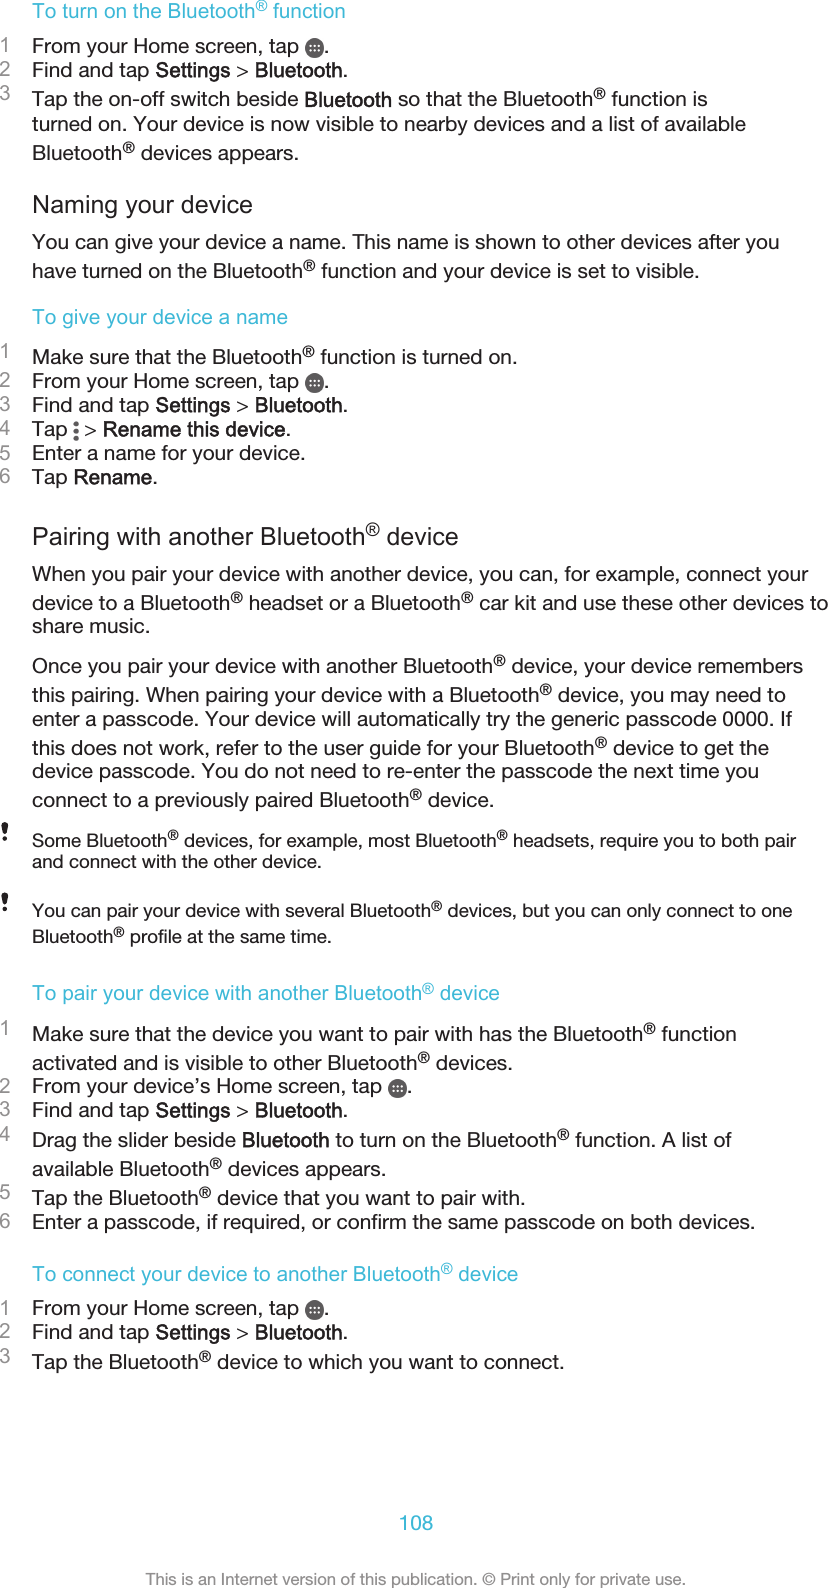 To turn on the Bluetooth® function1From your Home screen, tap  .2Find and tap Settings &gt; Bluetooth.3Tap the on-off switch beside Bluetooth so that the Bluetooth® function isturned on. Your device is now visible to nearby devices and a list of availableBluetooth® devices appears.Naming your deviceYou can give your device a name. This name is shown to other devices after youhave turned on the Bluetooth® function and your device is set to visible.To give your device a name1Make sure that the Bluetooth® function is turned on.2From your Home screen, tap  .3Find and tap Settings &gt; Bluetooth.4Tap   &gt; Rename this device.5Enter a name for your device.6Tap Rename.Pairing with another Bluetooth® deviceWhen you pair your device with another device, you can, for example, connect yourdevice to a Bluetooth® headset or a Bluetooth® car kit and use these other devices toshare music.Once you pair your device with another Bluetooth® device, your device remembersthis pairing. When pairing your device with a Bluetooth® device, you may need toenter a passcode. Your device will automatically try the generic passcode 0000. Ifthis does not work, refer to the user guide for your Bluetooth® device to get thedevice passcode. You do not need to re-enter the passcode the next time youconnect to a previously paired Bluetooth® device.Some Bluetooth® devices, for example, most Bluetooth® headsets, require you to both pairand connect with the other device.You can pair your device with several Bluetooth® devices, but you can only connect to oneBluetooth® profile at the same time.To pair your device with another Bluetooth® device1Make sure that the device you want to pair with has the Bluetooth® functionactivated and is visible to other Bluetooth® devices.2From your device’s Home screen, tap  .3Find and tap Settings &gt; Bluetooth.4Drag the slider beside Bluetooth to turn on the Bluetooth® function. A list ofavailable Bluetooth® devices appears.5Tap the Bluetooth® device that you want to pair with.6Enter a passcode, if required, or confirm the same passcode on both devices.To connect your device to another Bluetooth® device1From your Home screen, tap  .2Find and tap Settings &gt; Bluetooth.3Tap the Bluetooth® device to which you want to connect.108This is an Internet version of this publication. © Print only for private use.